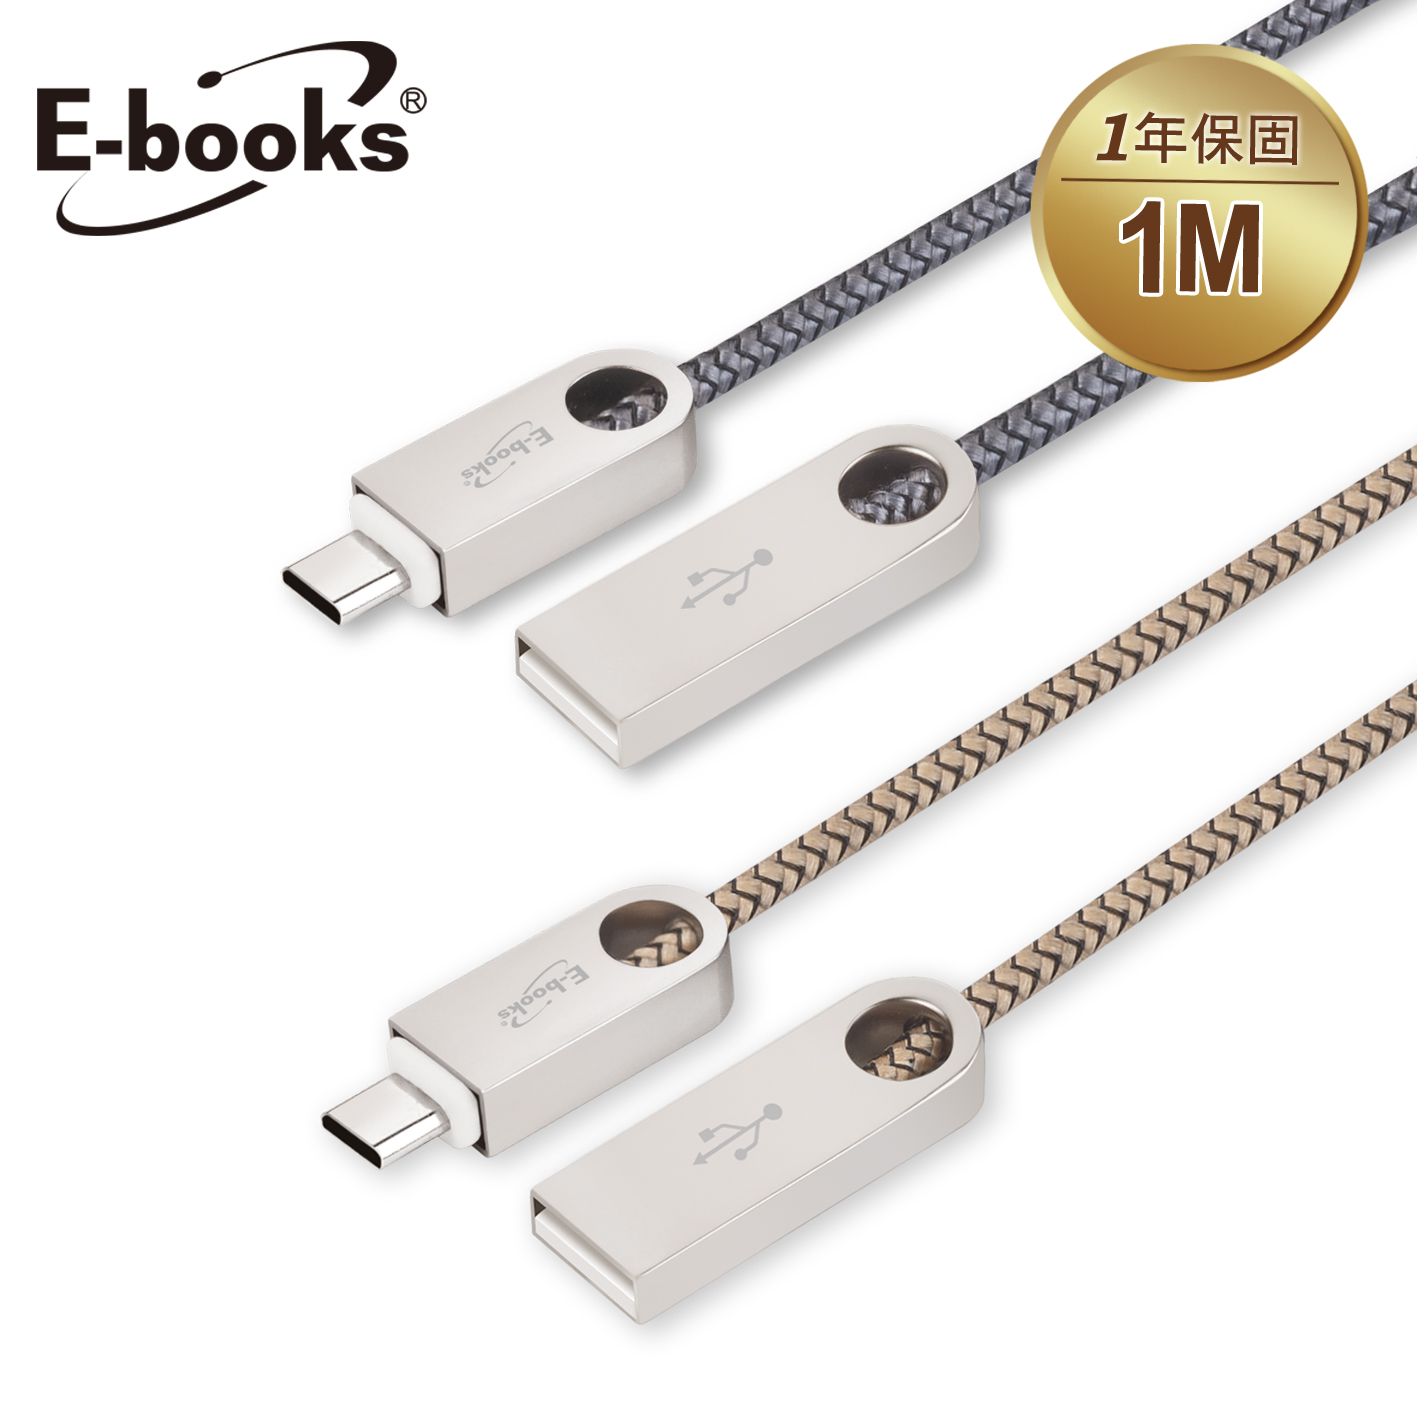 E-books X35 Type C Cable 1M, , large